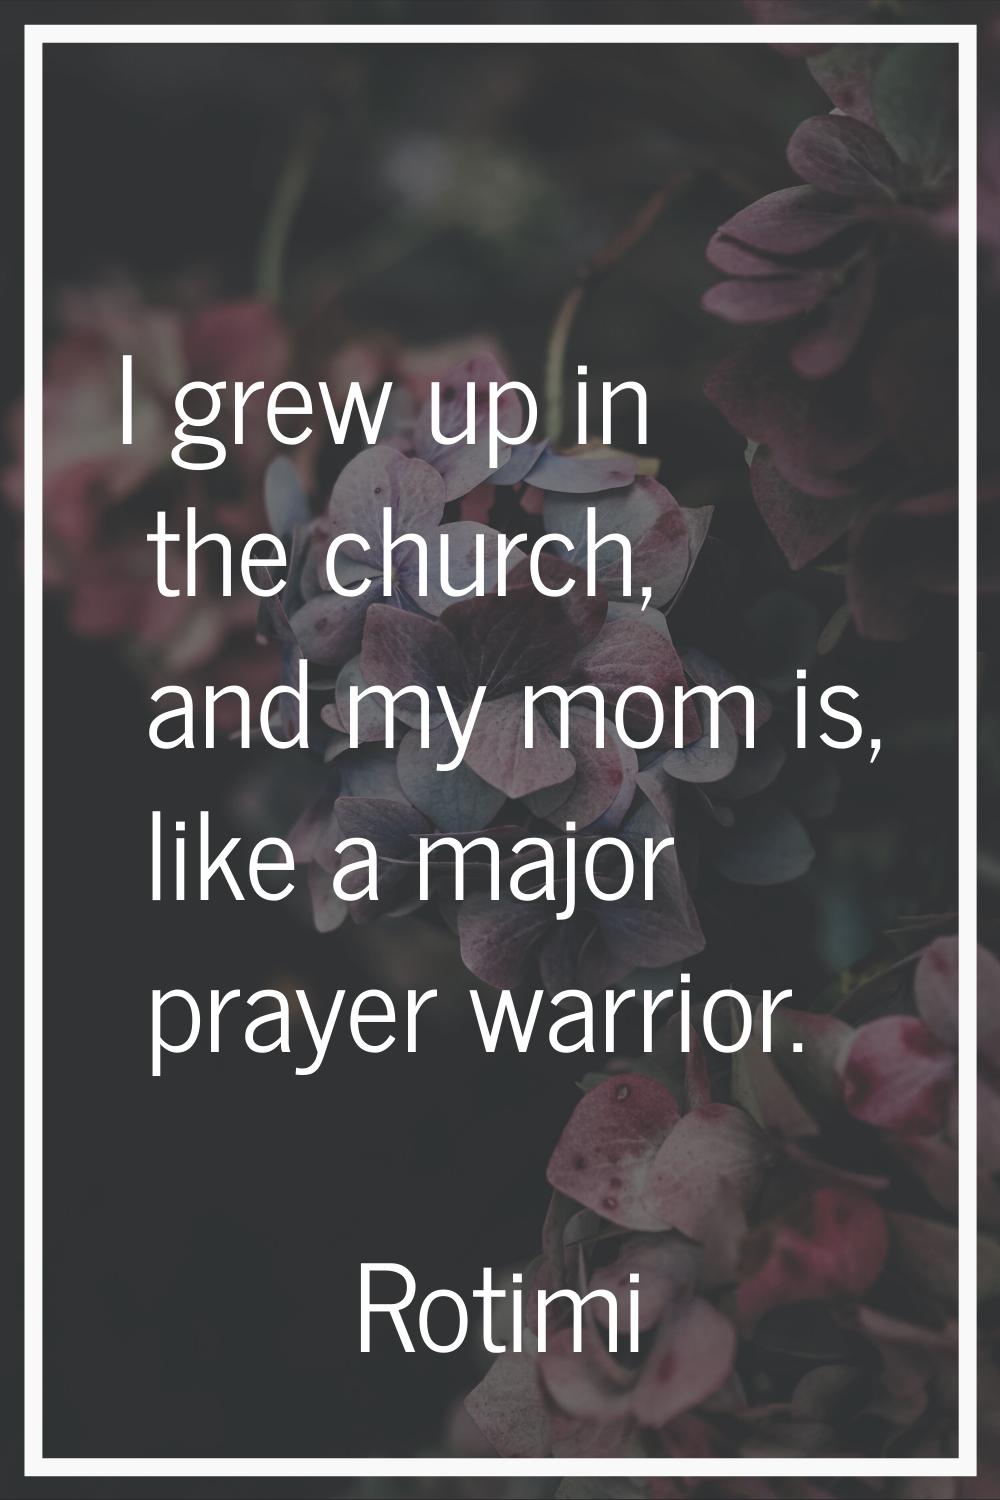 I grew up in the church, and my mom is, like a major prayer warrior.